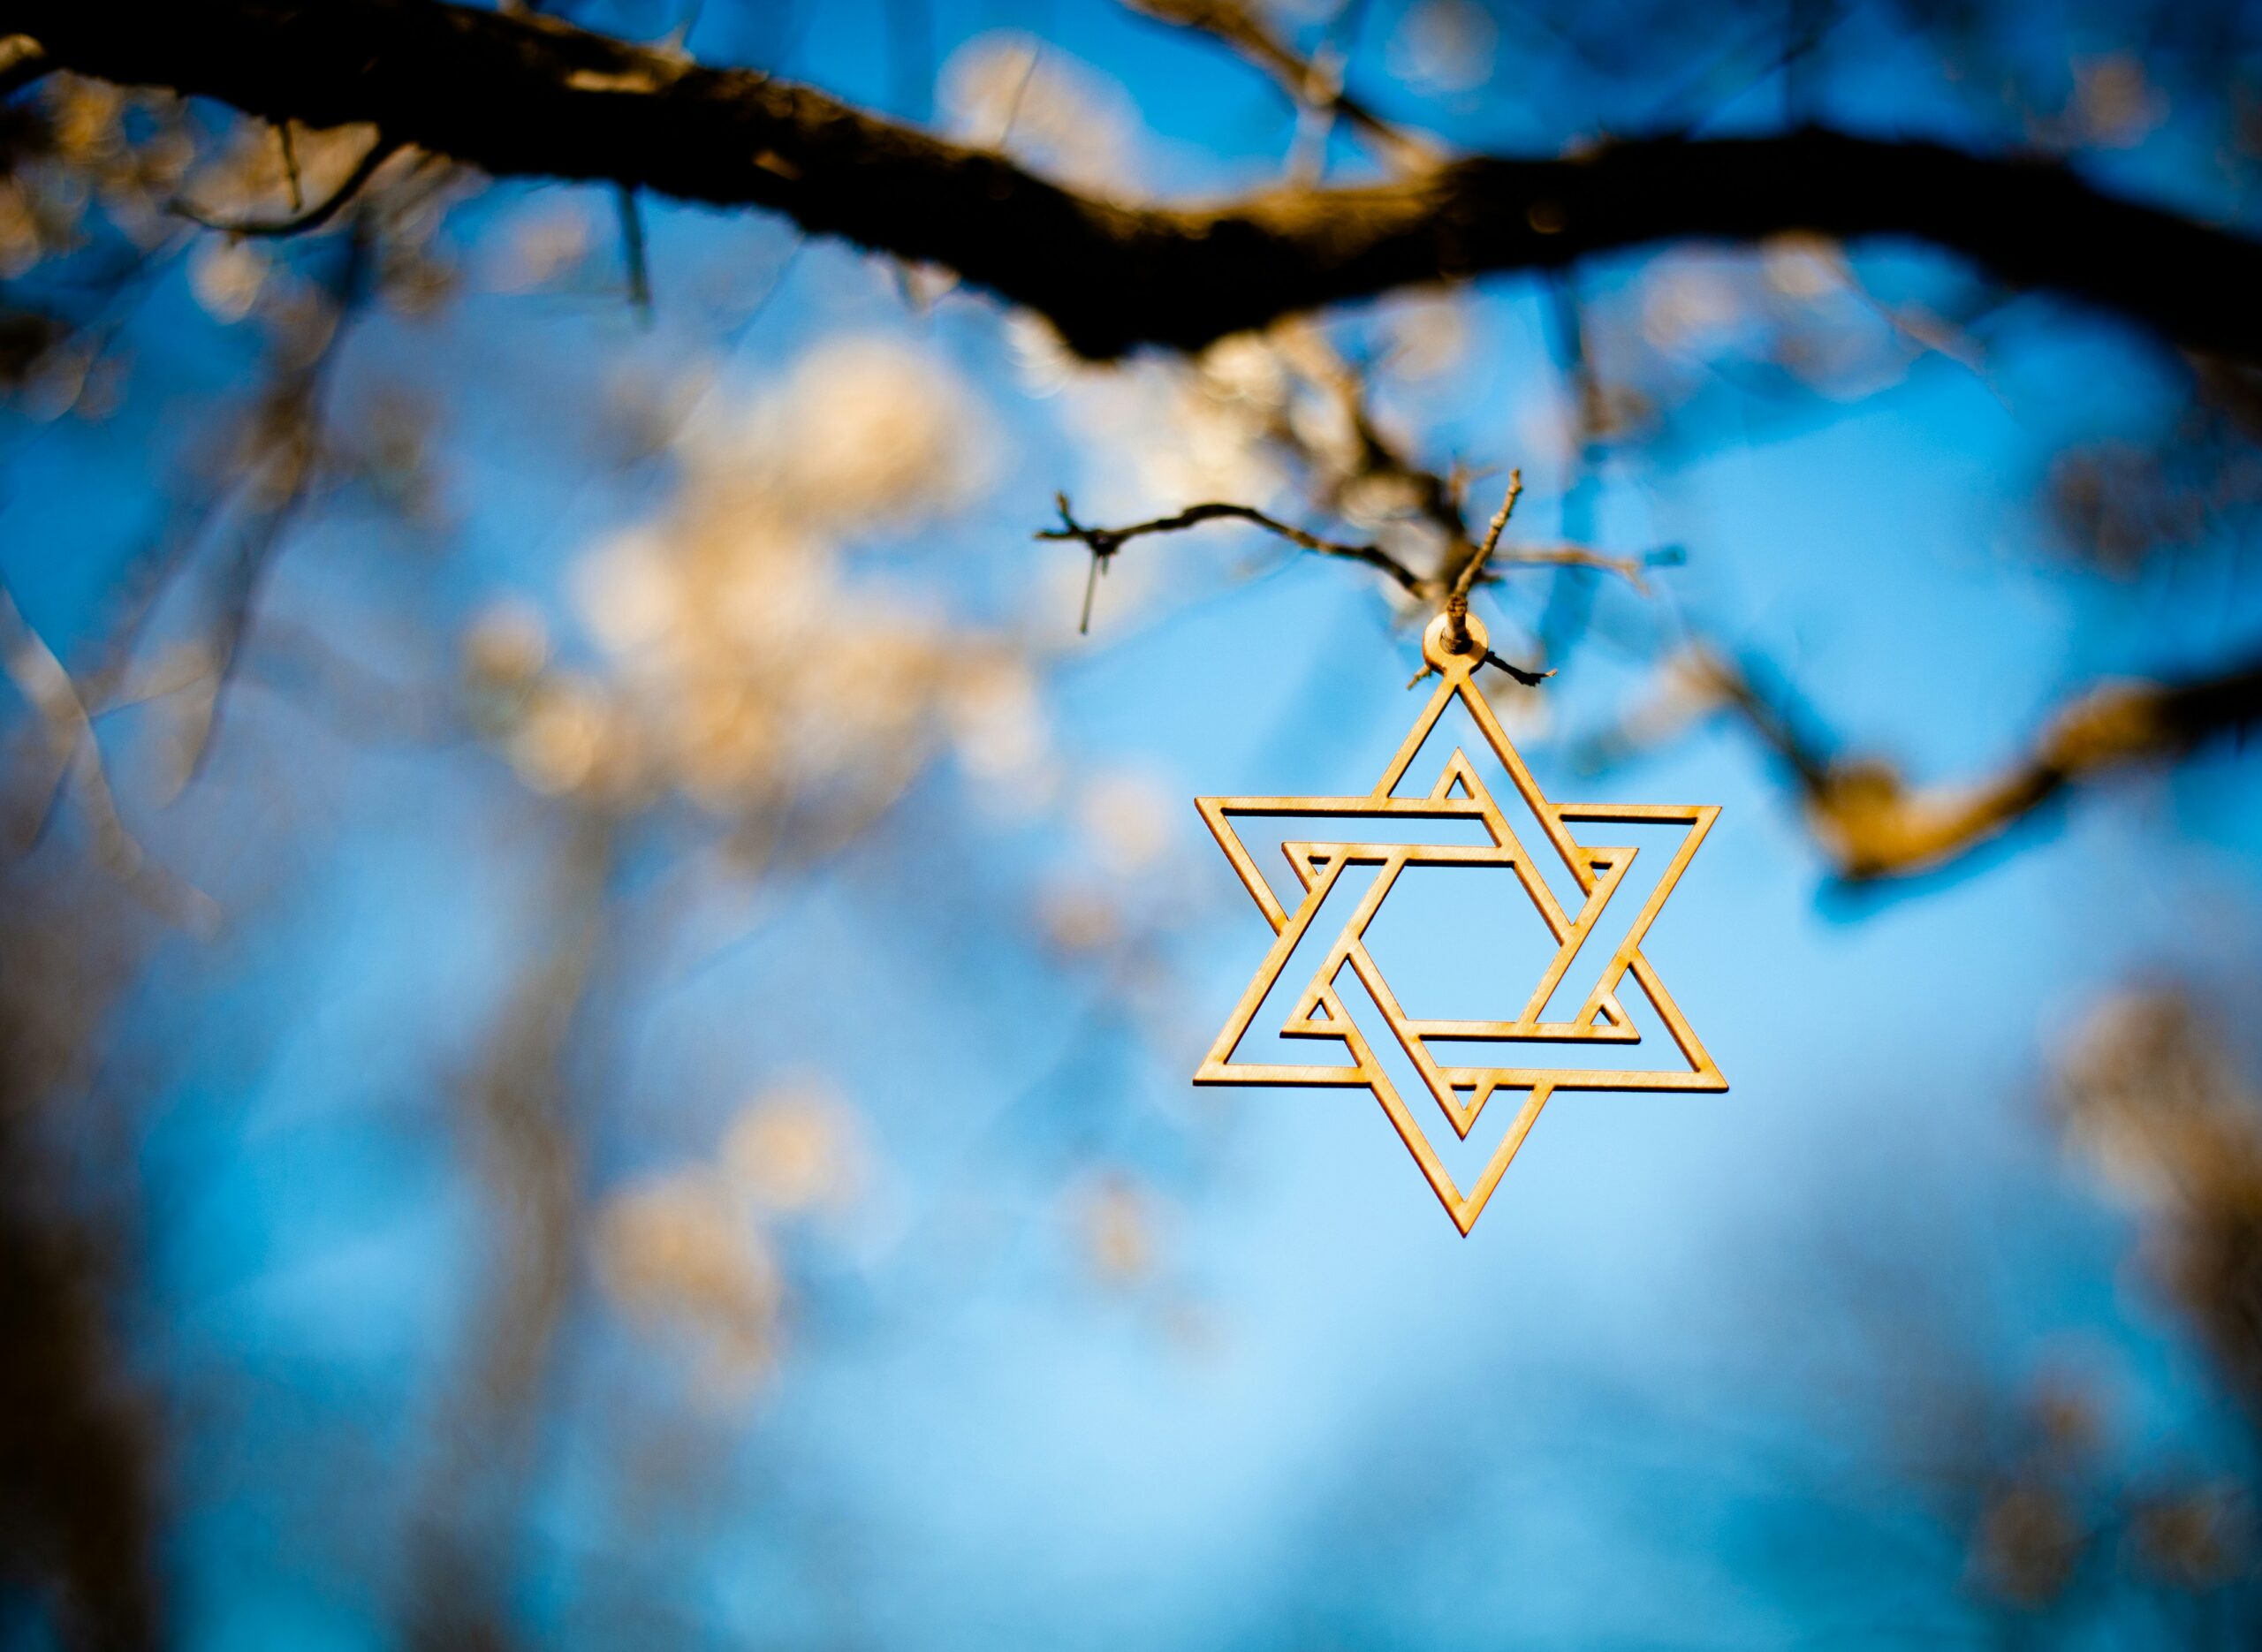 a Jewish star pendant hangs from the branch of a tree